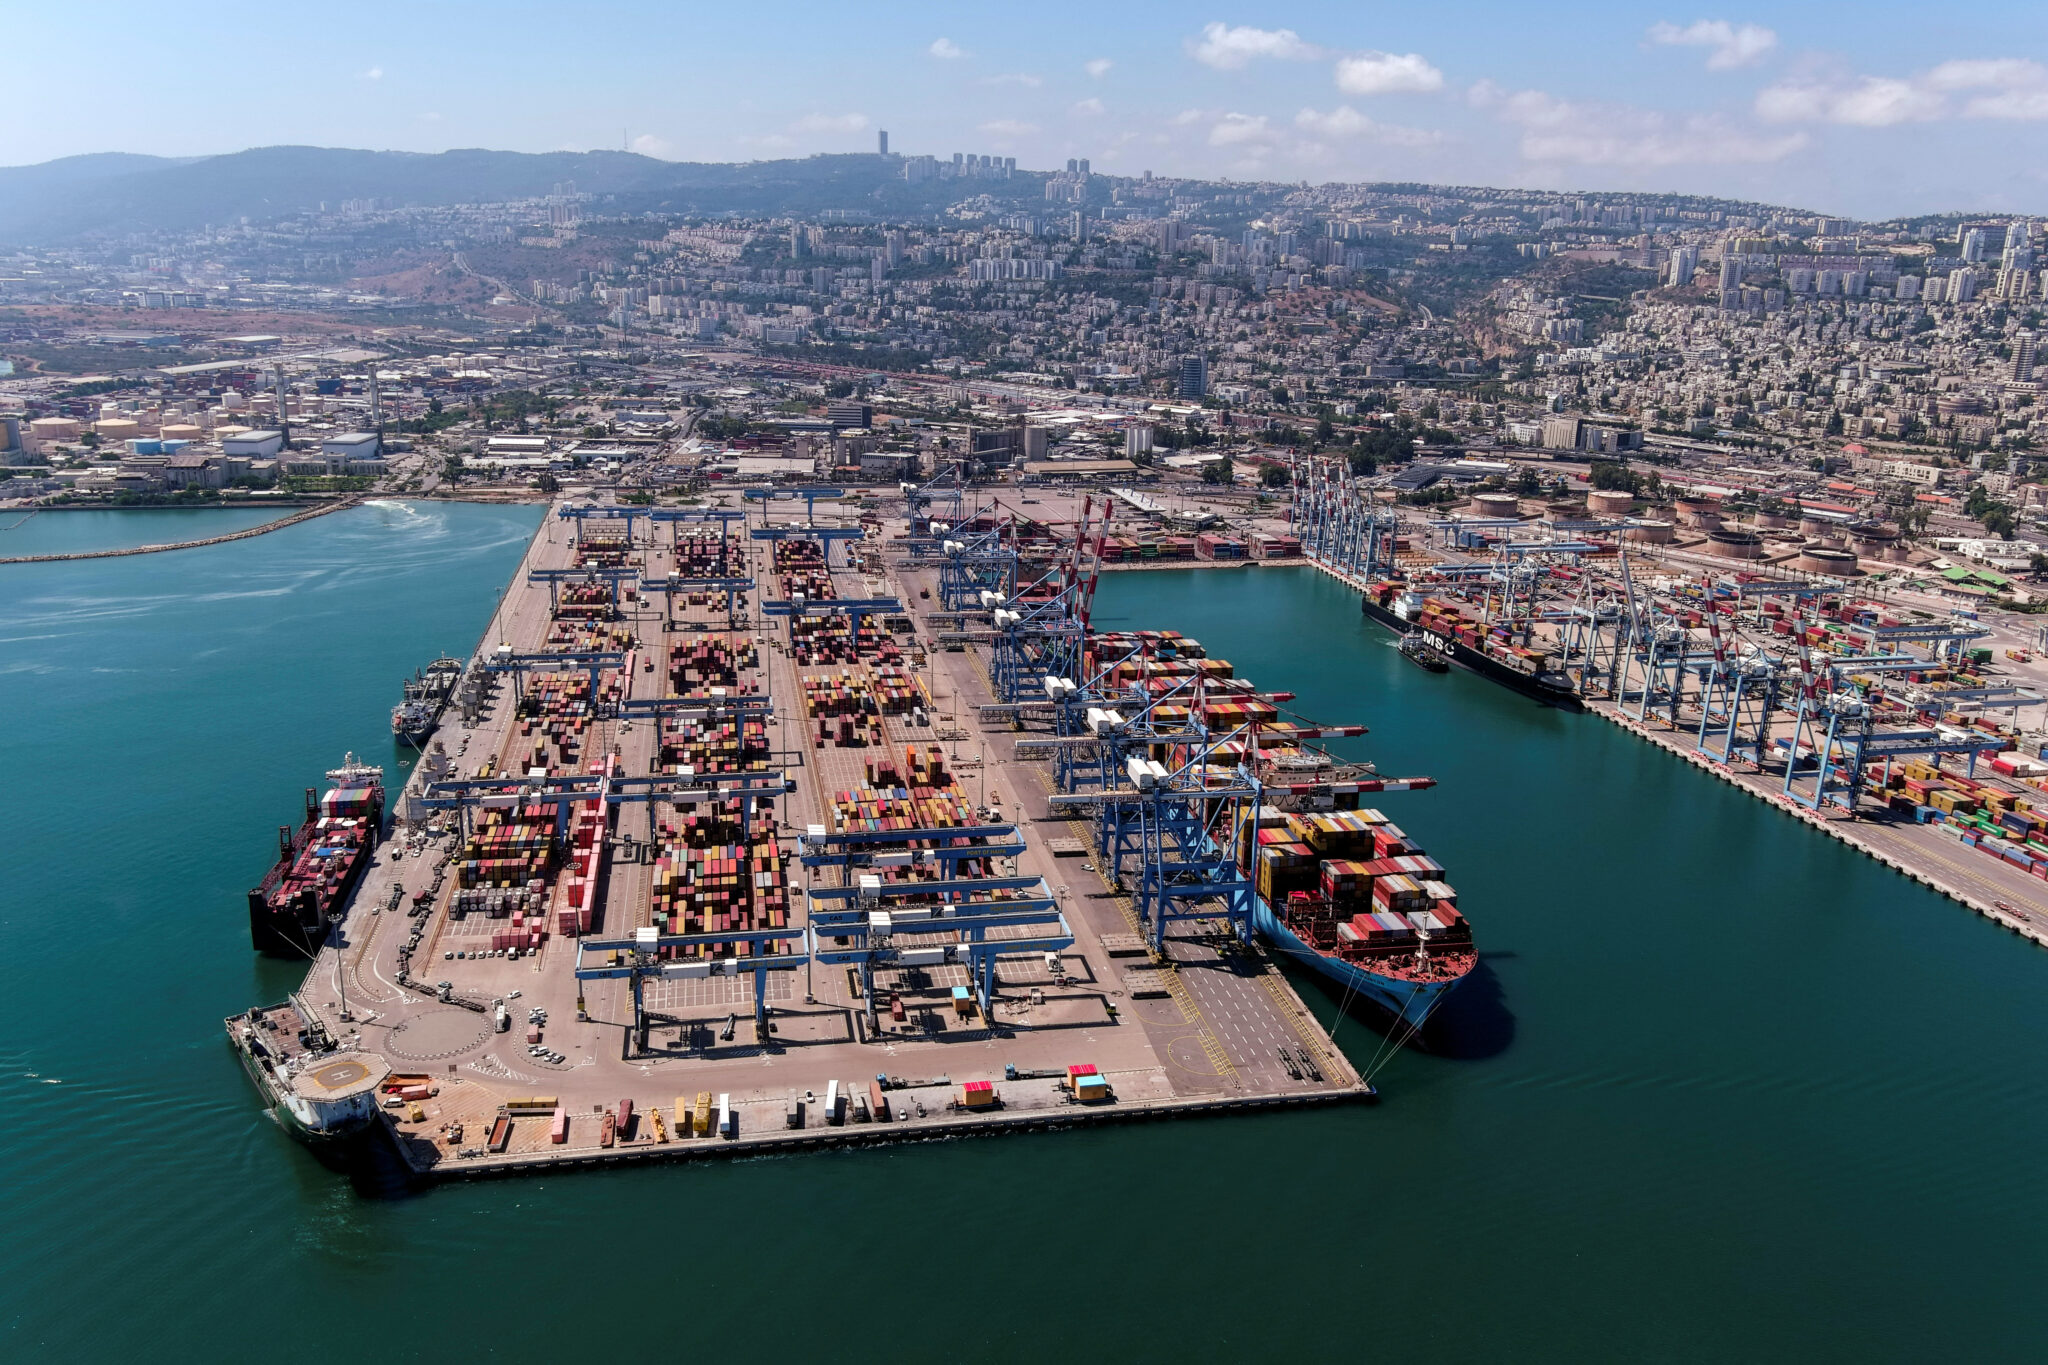 Adani Group Ensures Safety of Port of Haifa Employees Amidst Regional Concerns